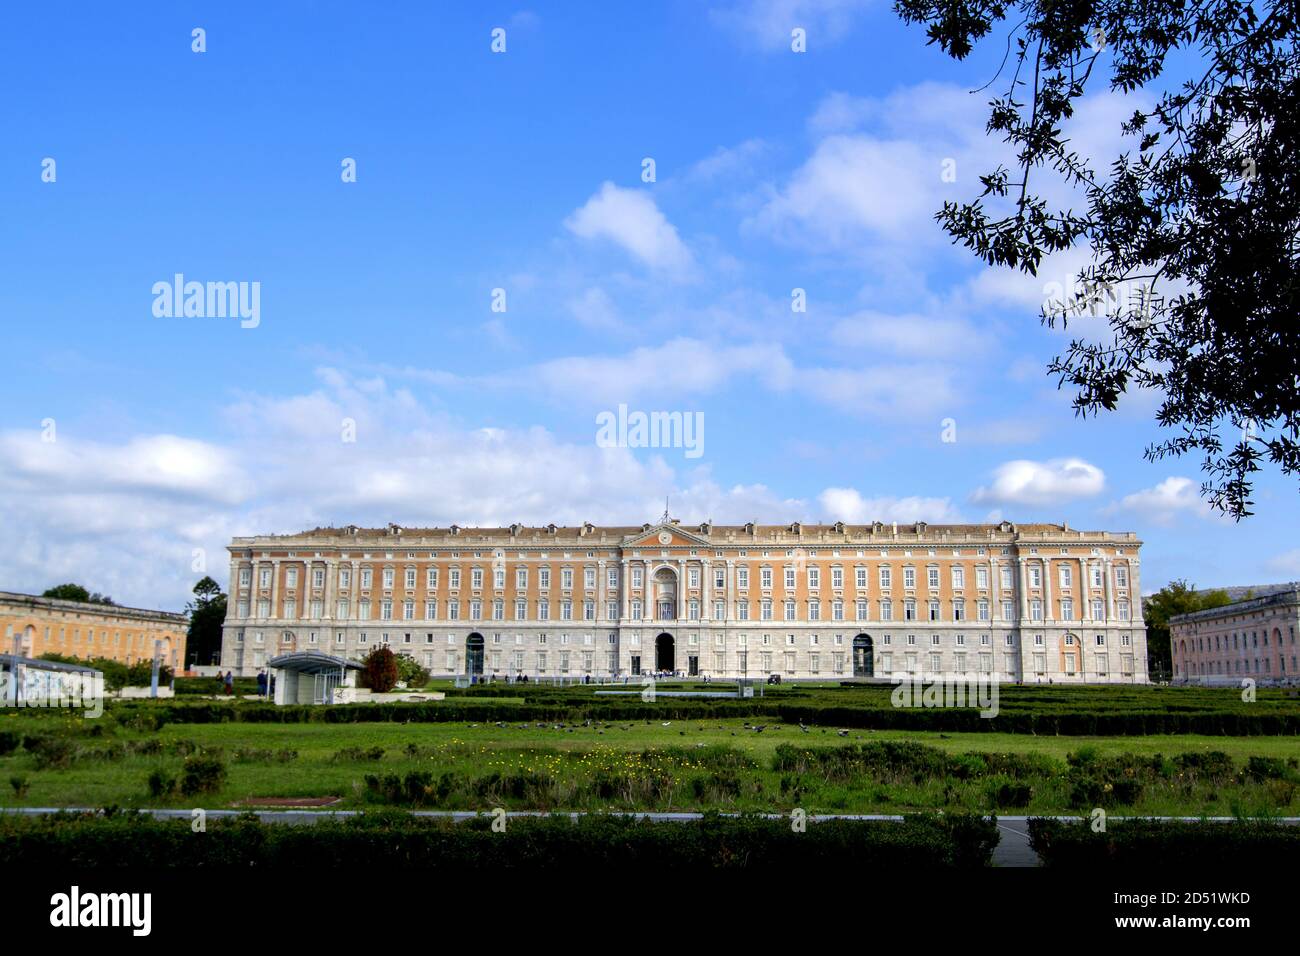 Caserta, Italy. 10th Oct, 2020. The Royal Palace of Caserta, a historic royal palace with an adjoining park, is located in Caserta. It was commissioned in the 18th century by Carlo di Borbone, king of Naples and Sicily, based on a project by Luigi Vanvitelli. It occupies an area of 47,000 m² (Photo by Patrizia Cortellessa/Pacific Press) Credit: Pacific Press Media Production Corp./Alamy Live News Stock Photo